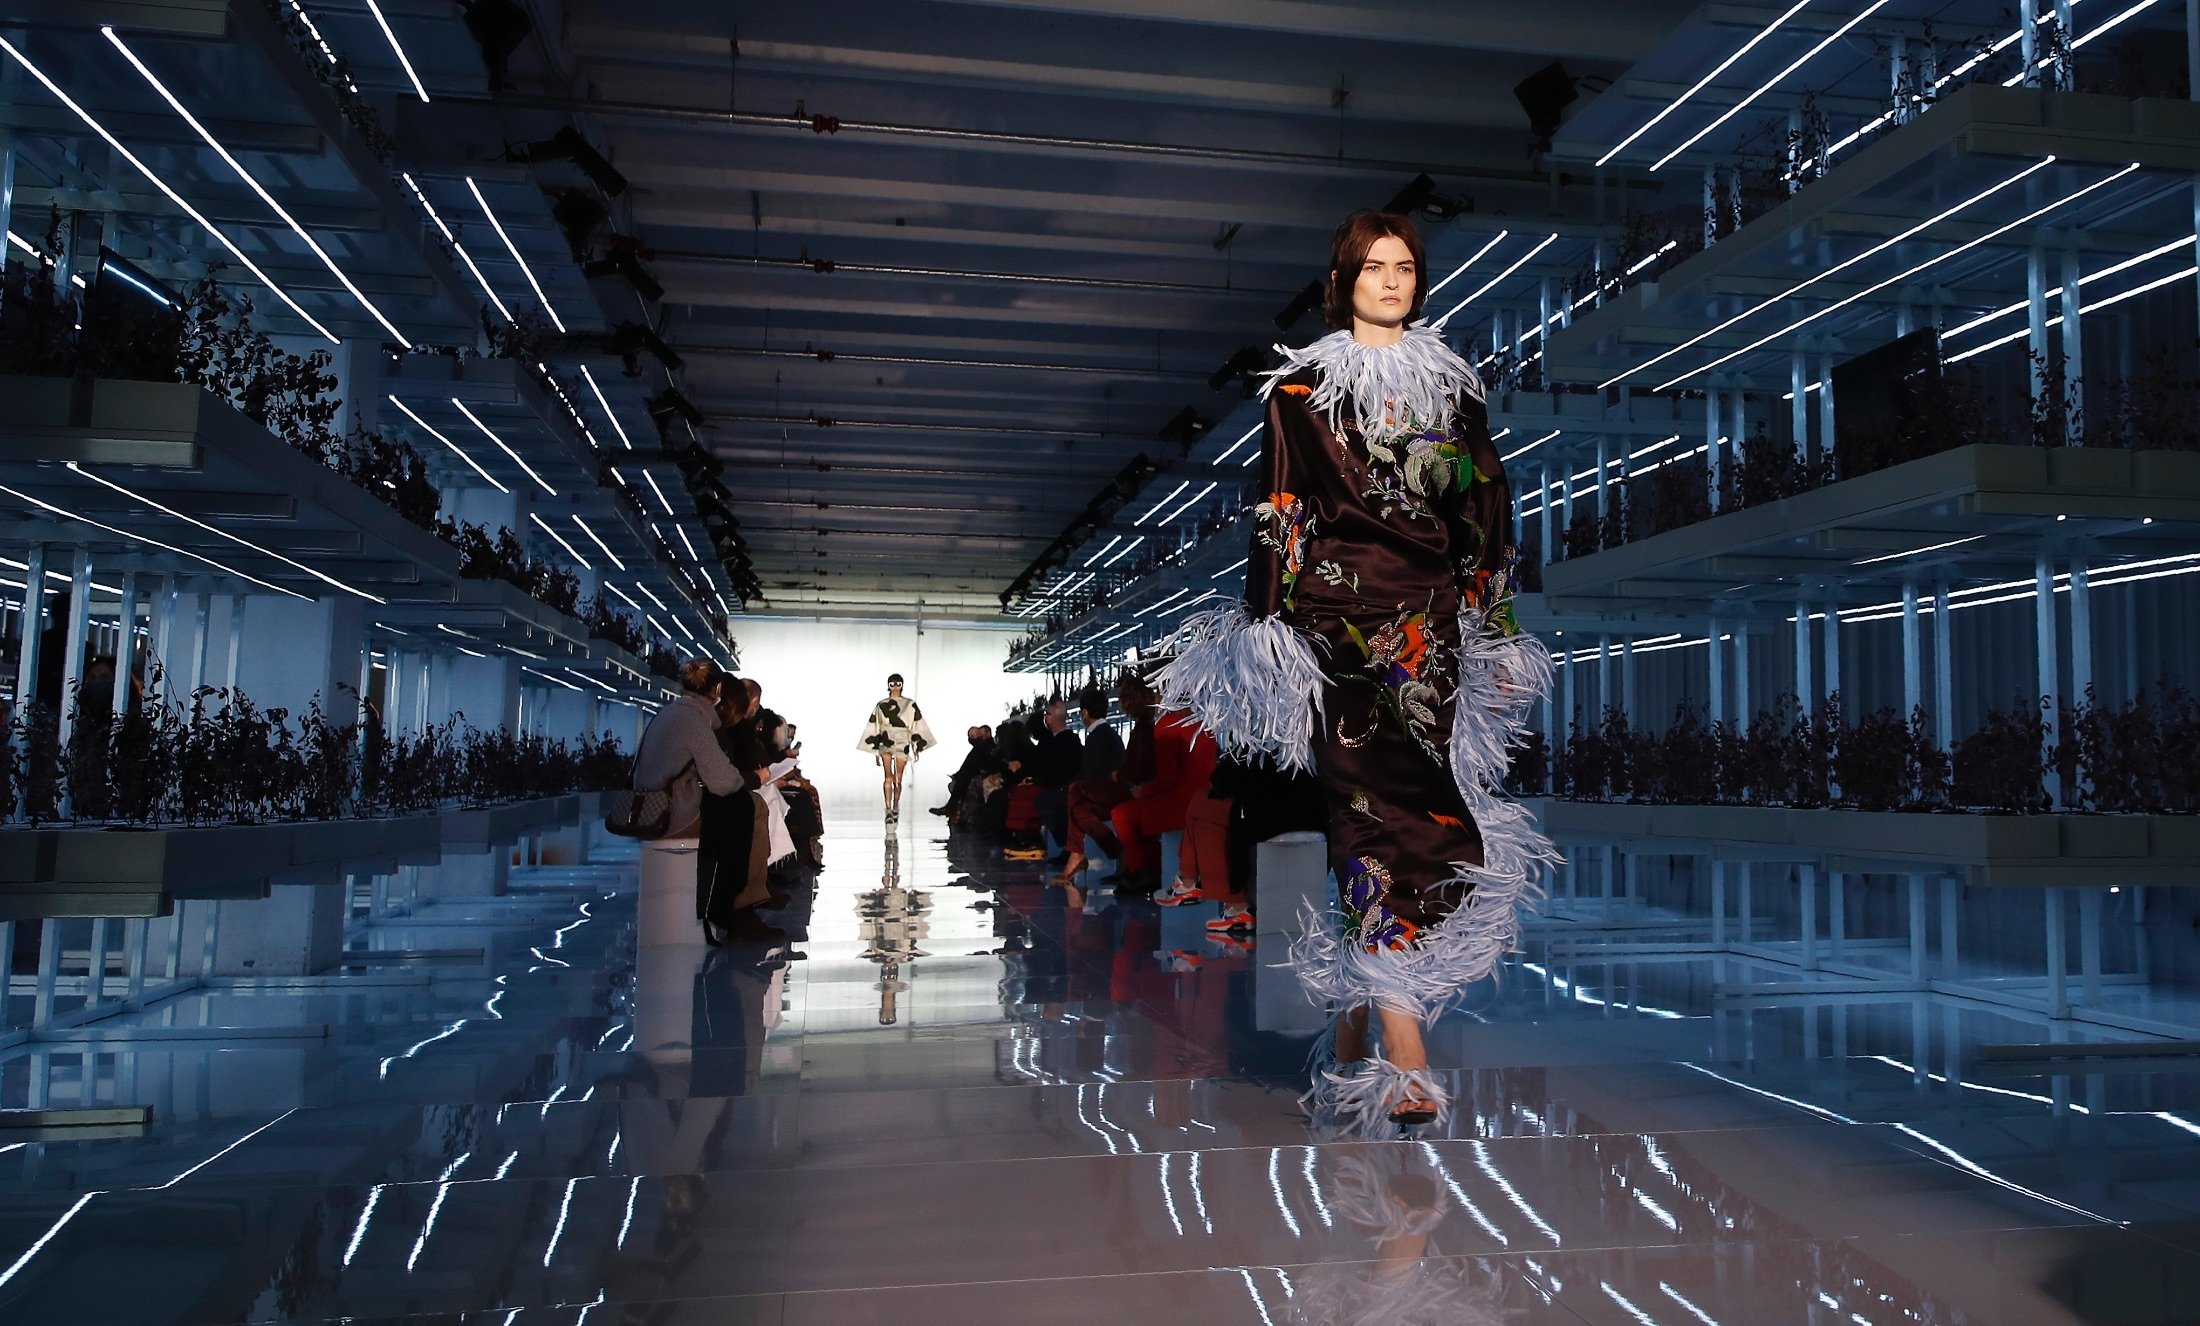 Milan Fashion Week kicks off with dazzling designs and showcases ...